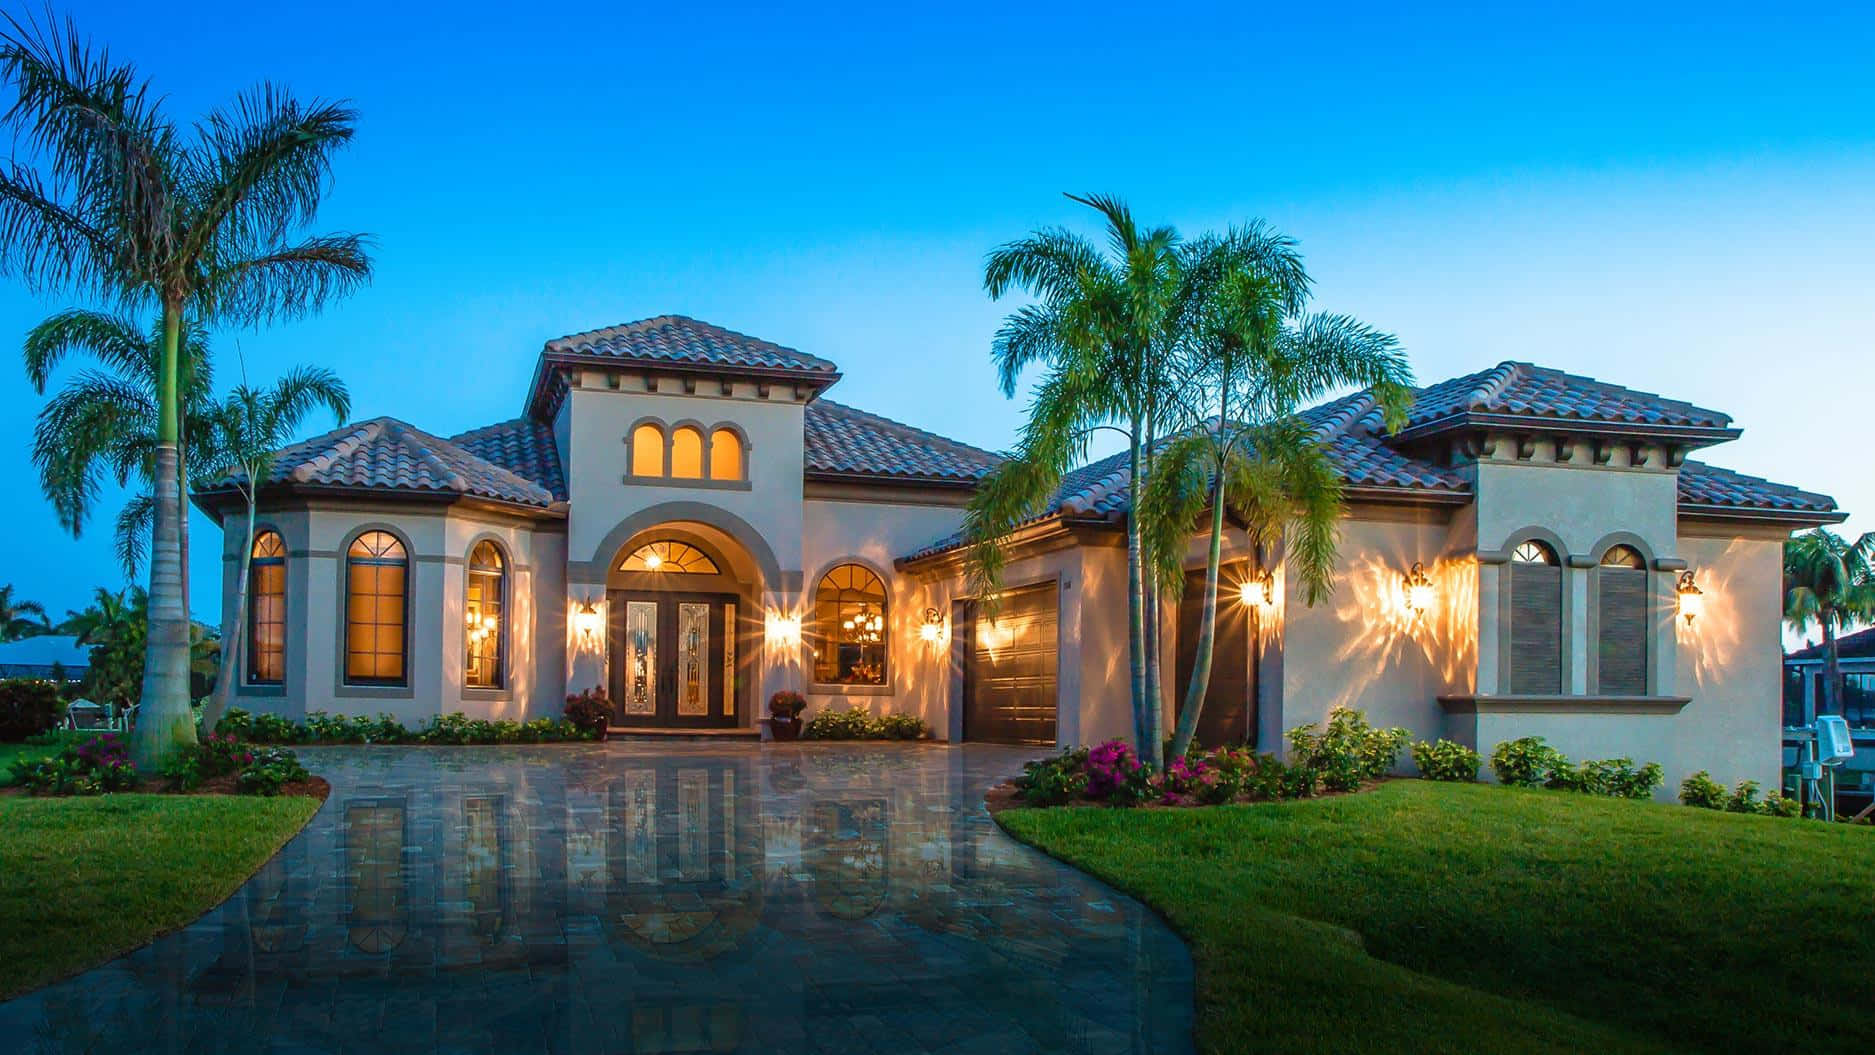 A Beautiful Home With Palm Trees And A Driveway